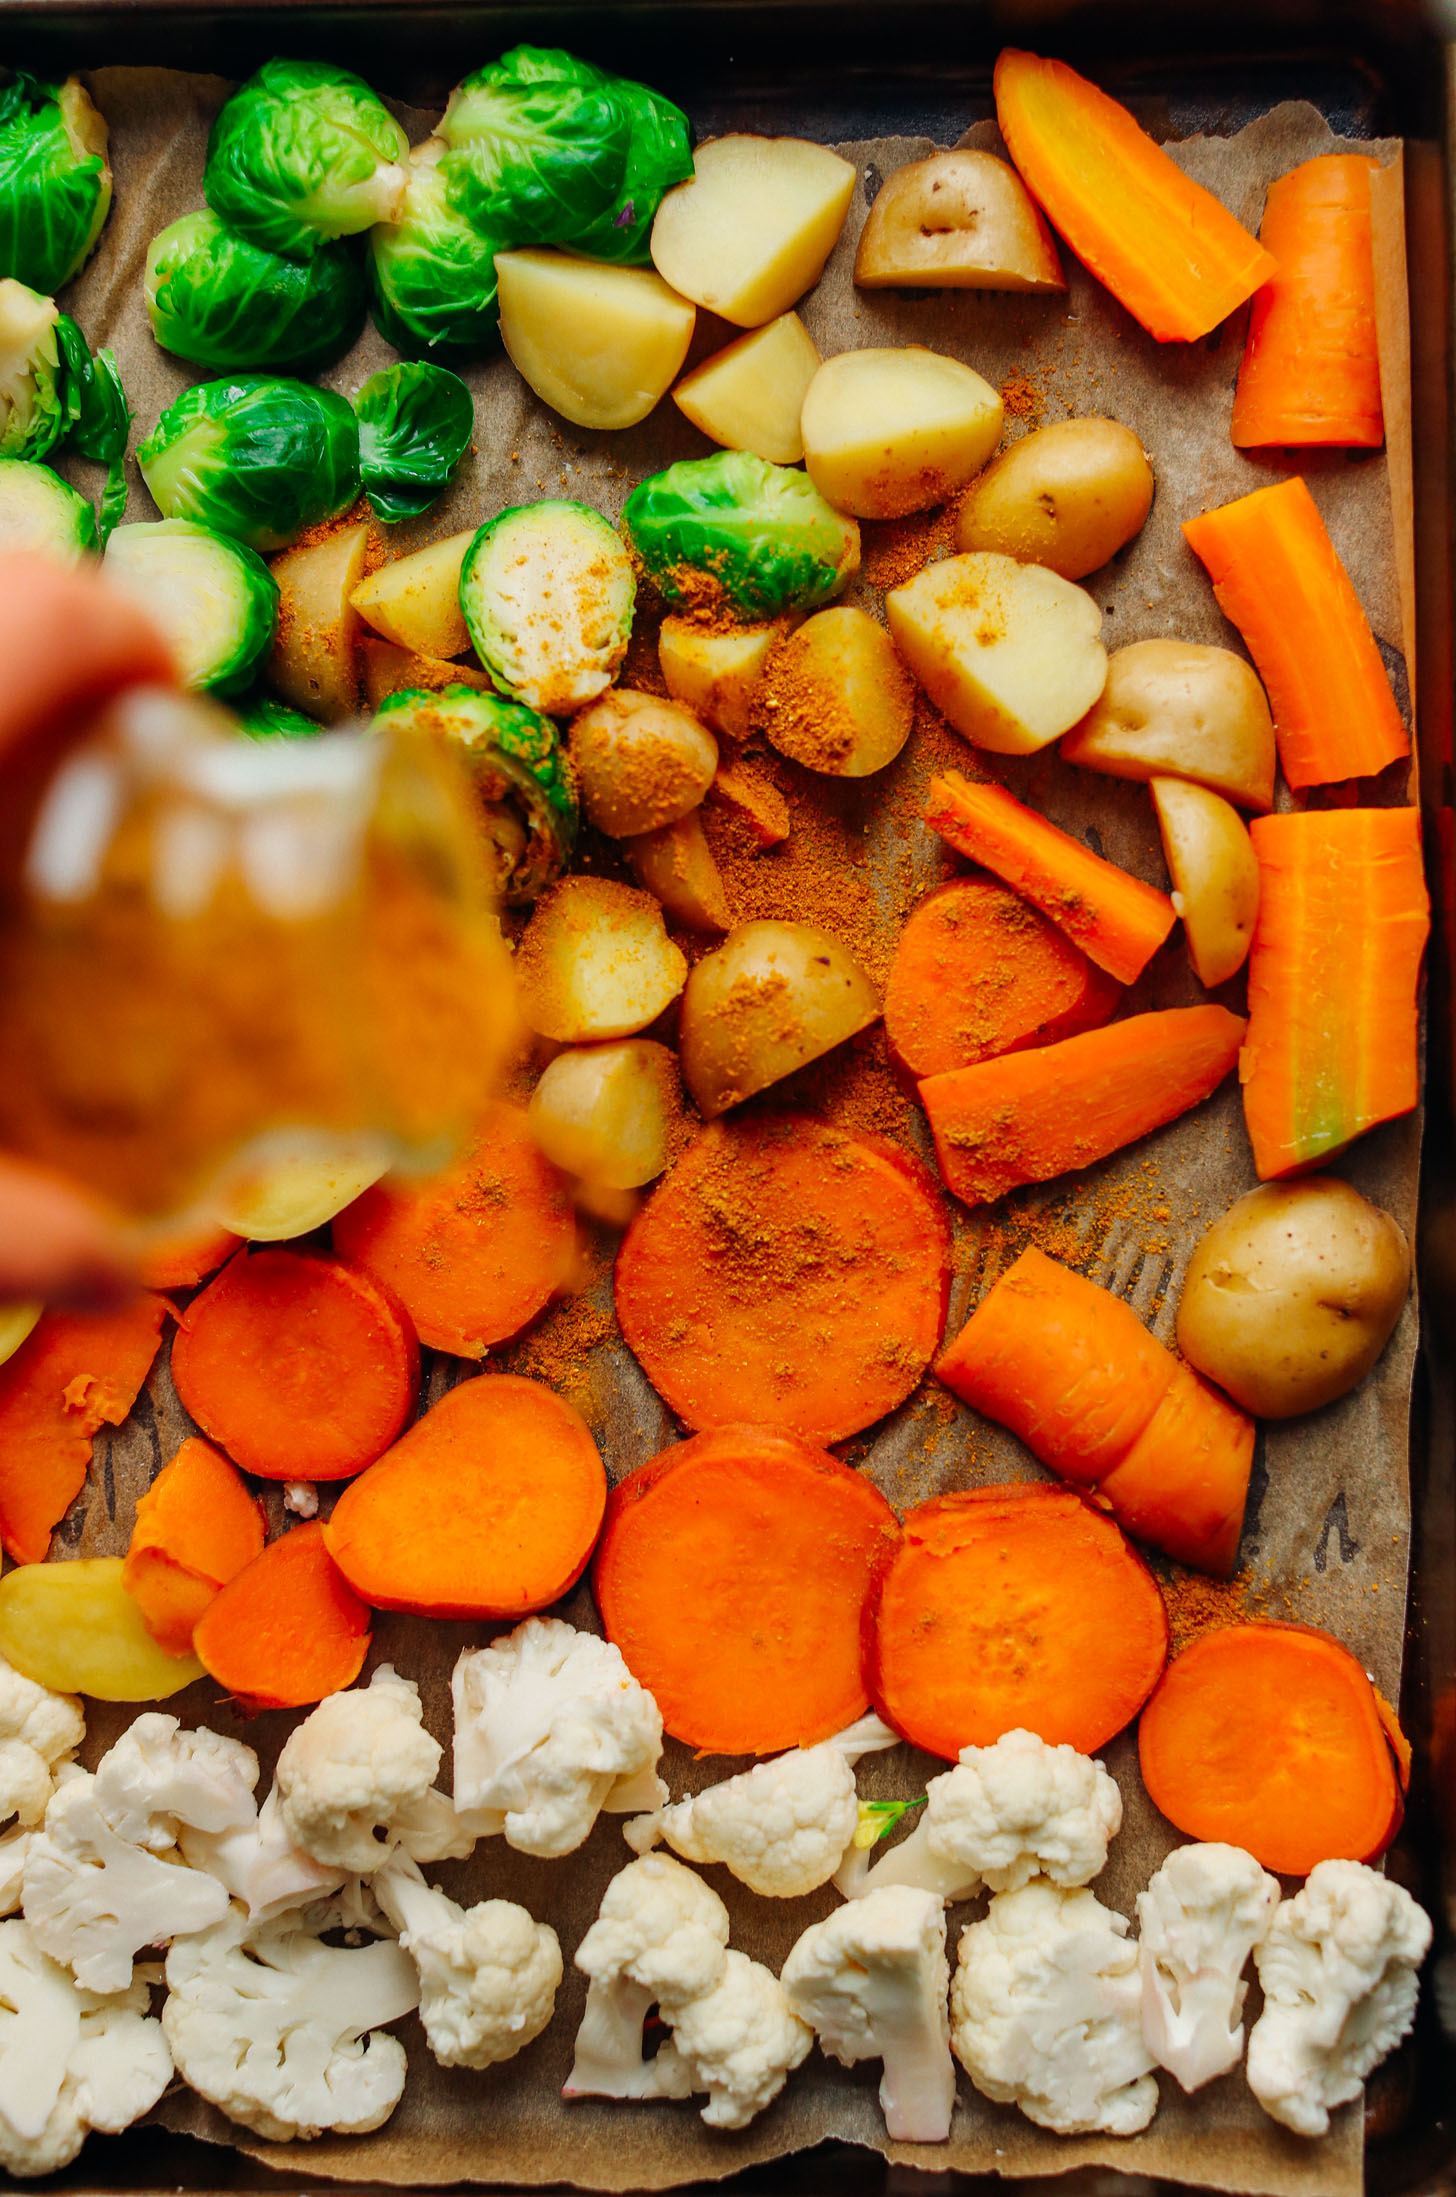 Sprinkling curry powder over a parchment-lined baking sheet filled with fresh veggies for roasting